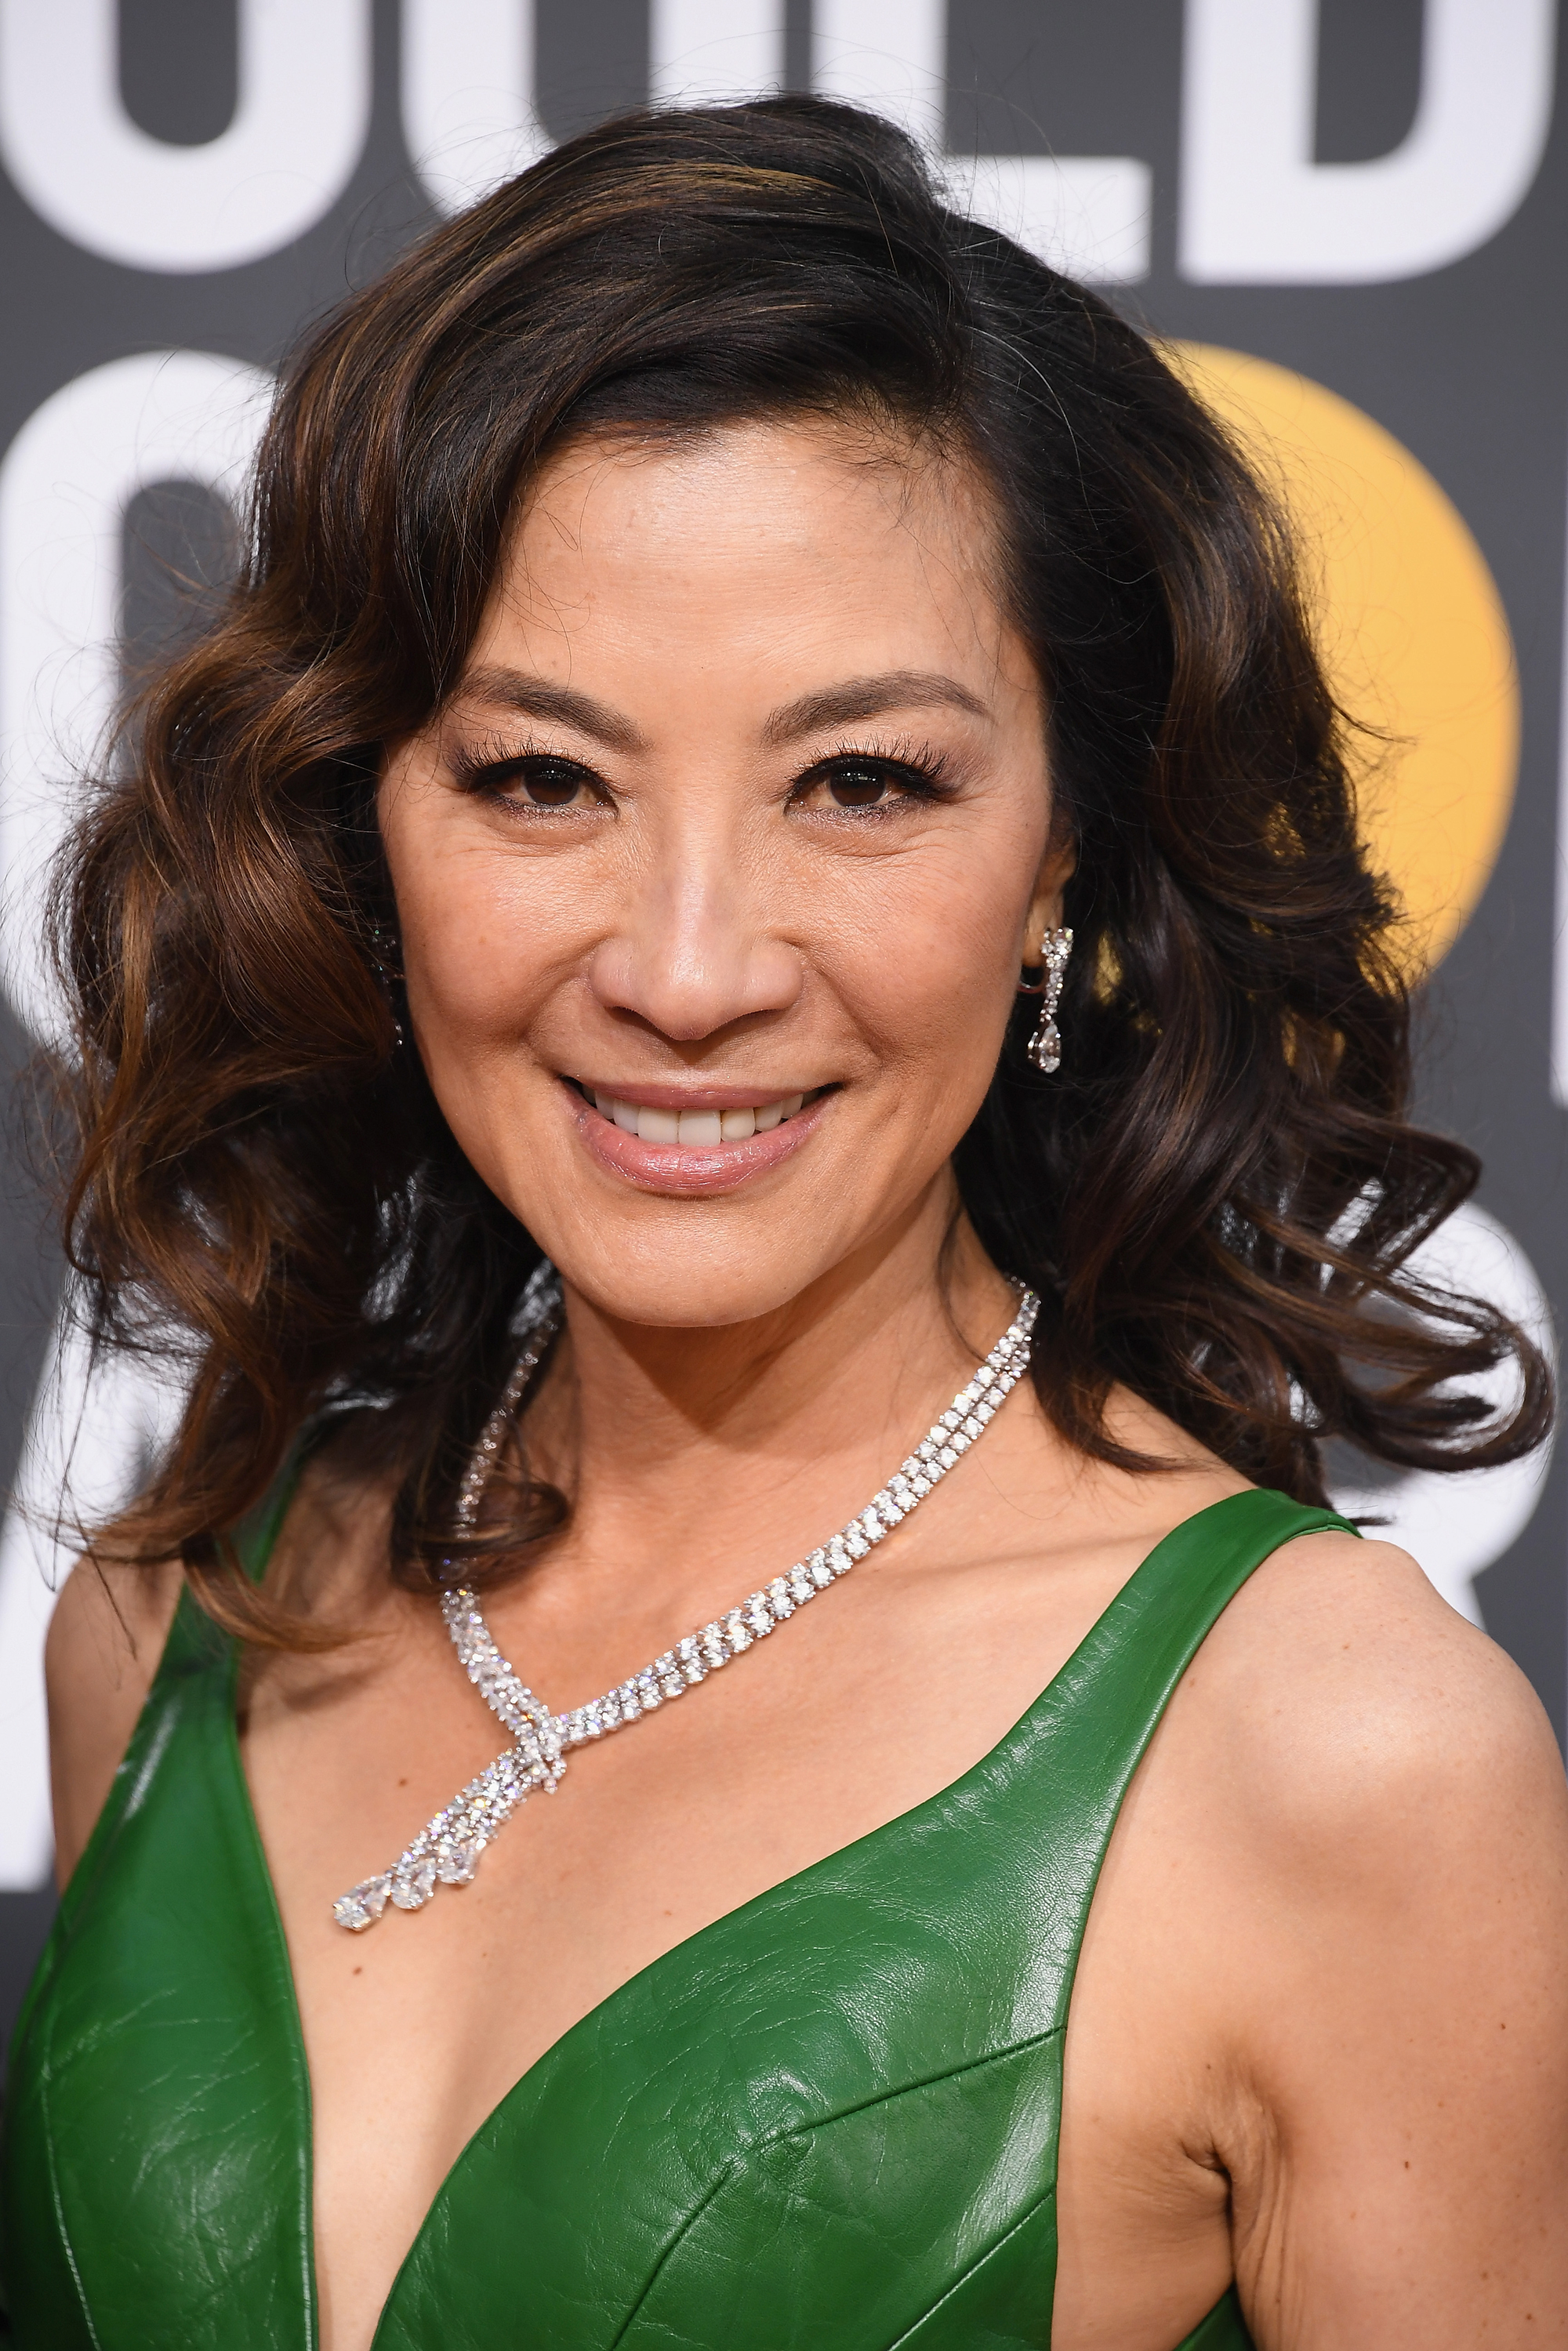 Michelle Yeoh says no to crazy stunts and nudity - 8 Days